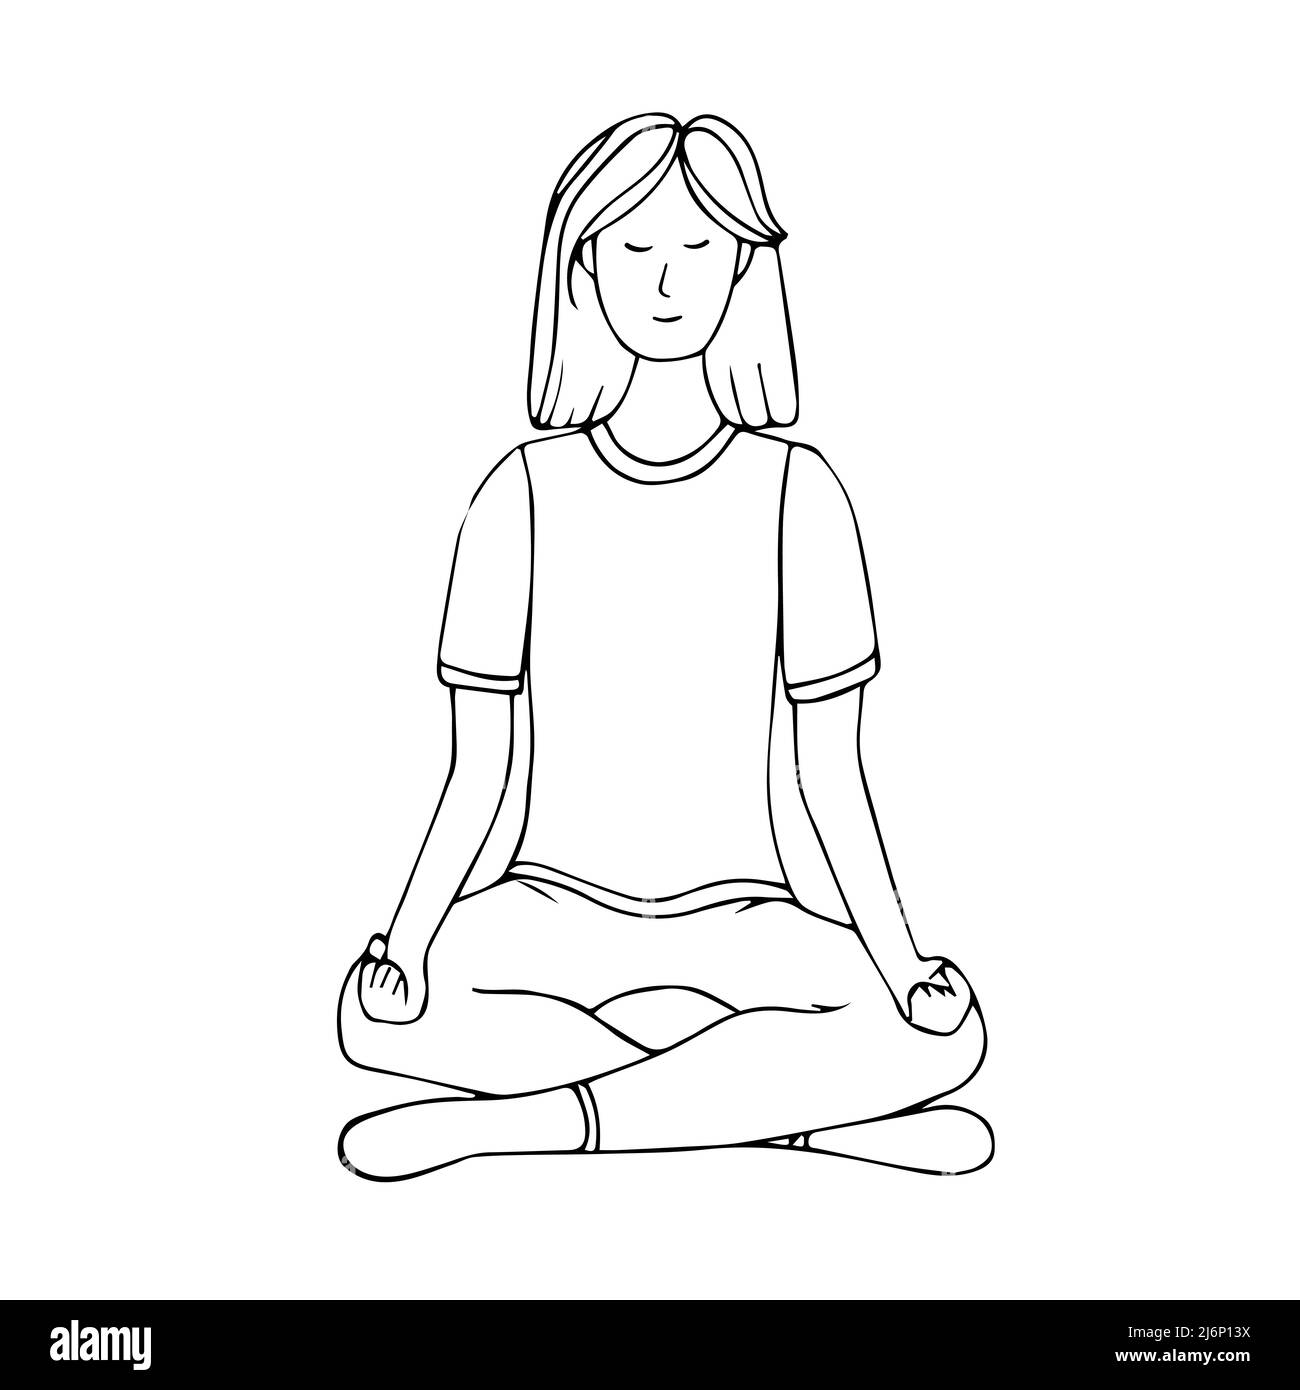 A young girl is engaged in Hatha yoga. Lotus position. Relaxation.Gymnastics, healthy lifestyle. Doodle style. Black and white vector illustration. Ha Stock Vector